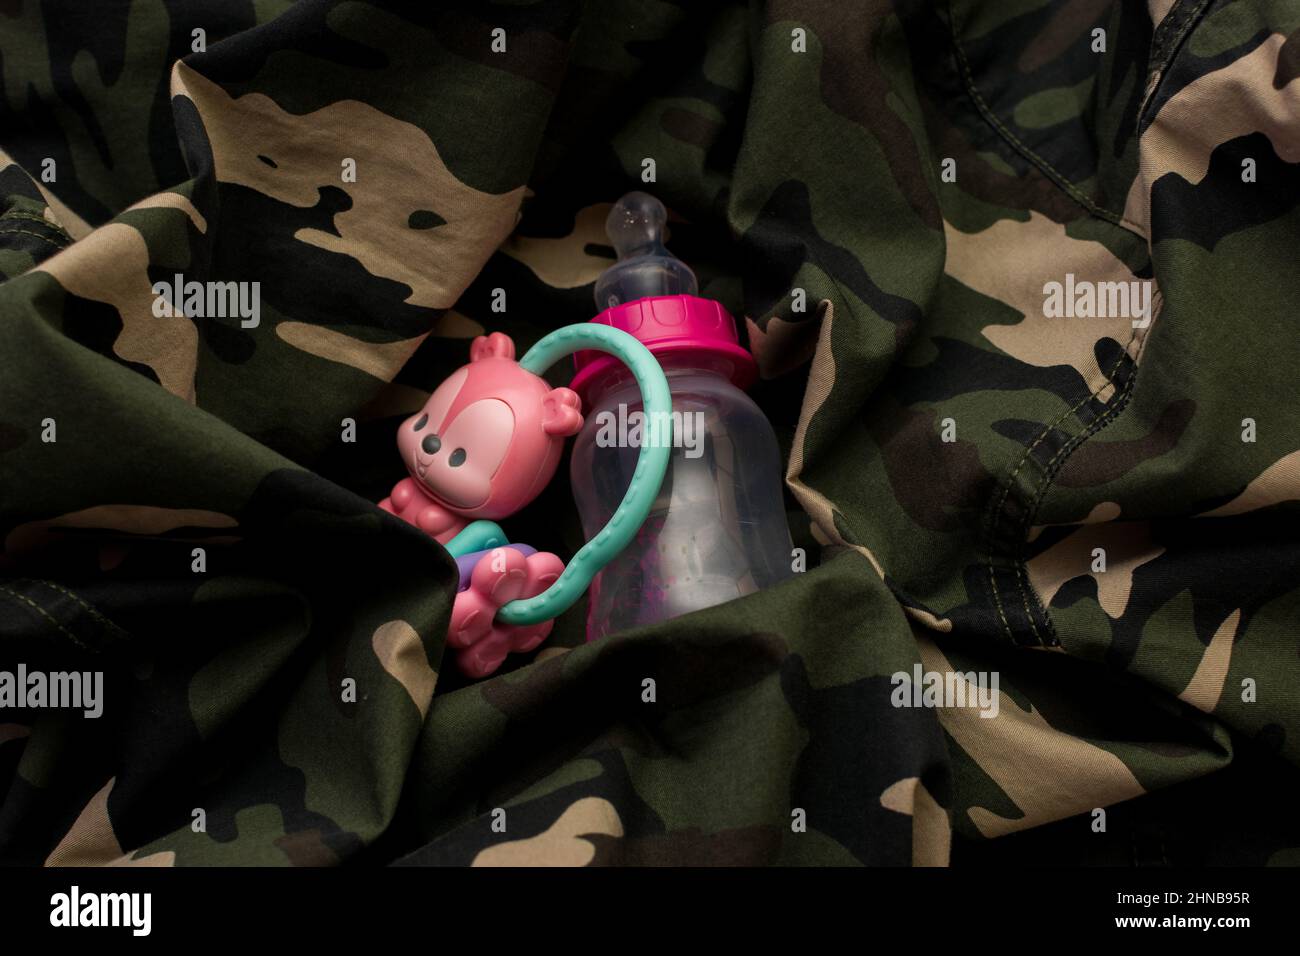 Rattle toy and baby bottle on military uniform. Love and war concept Stock Photo